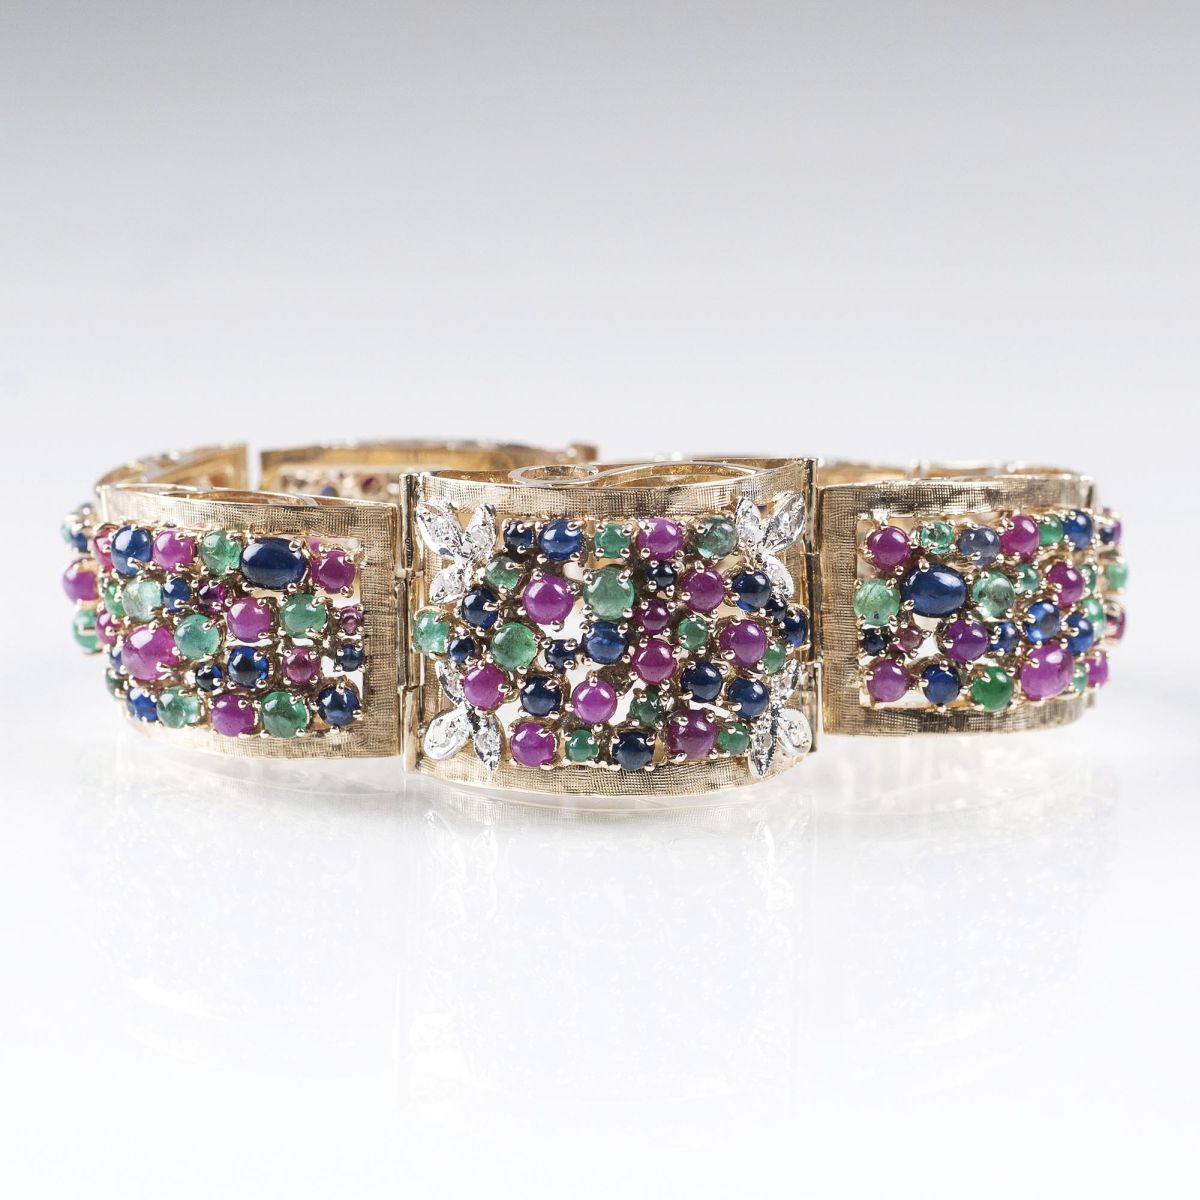 A Gold Bracelet with Rubies, Emeralds and Sapphires - image 2